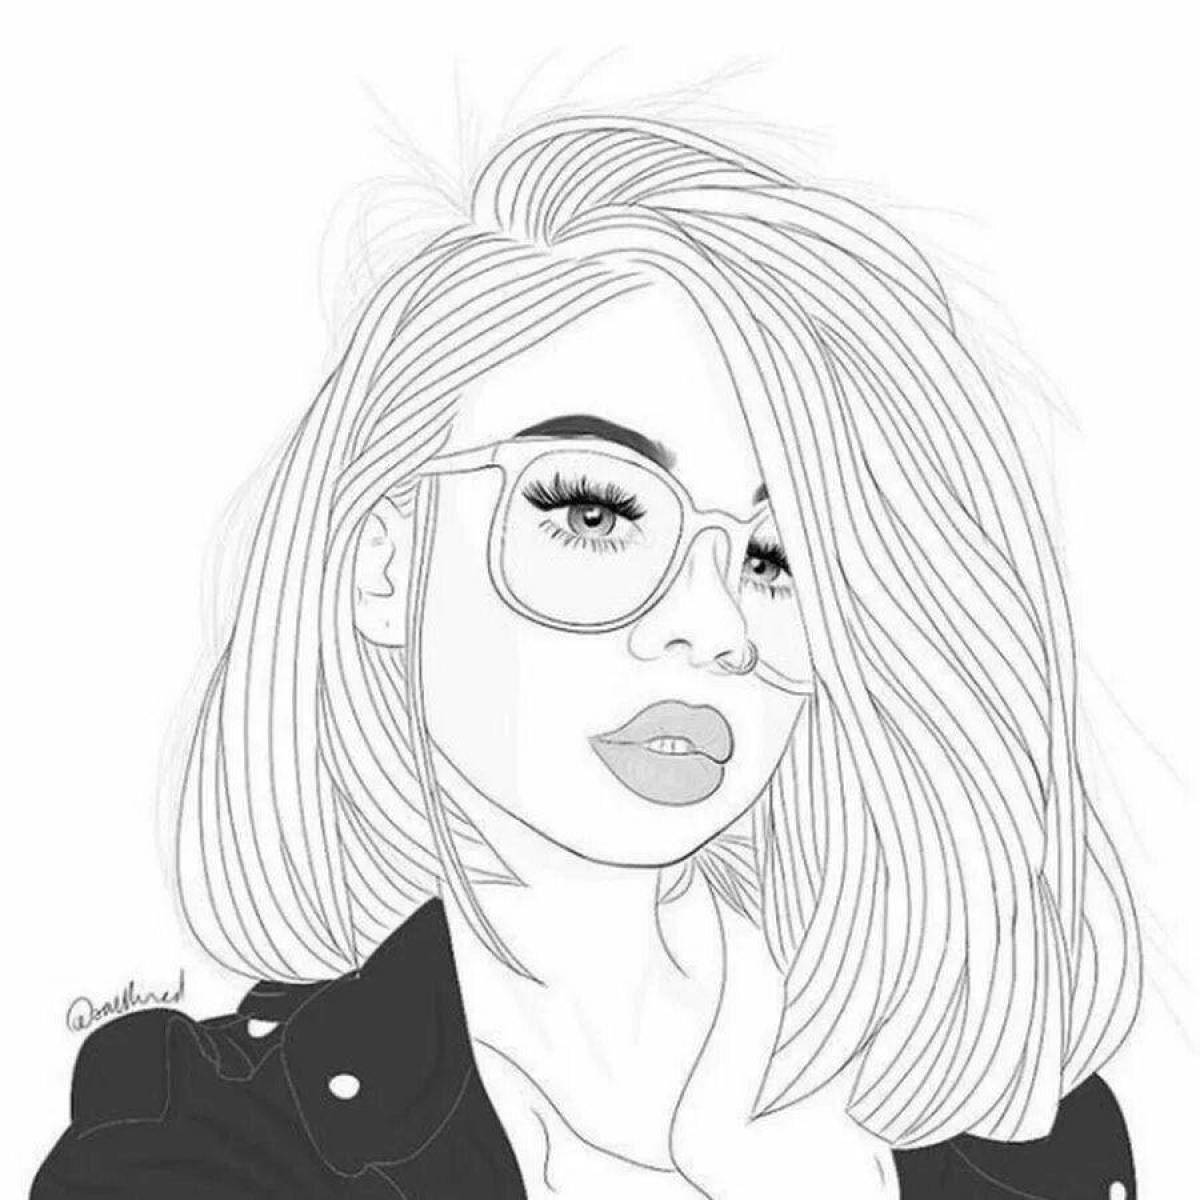 Shiny coloring book girl with glasses